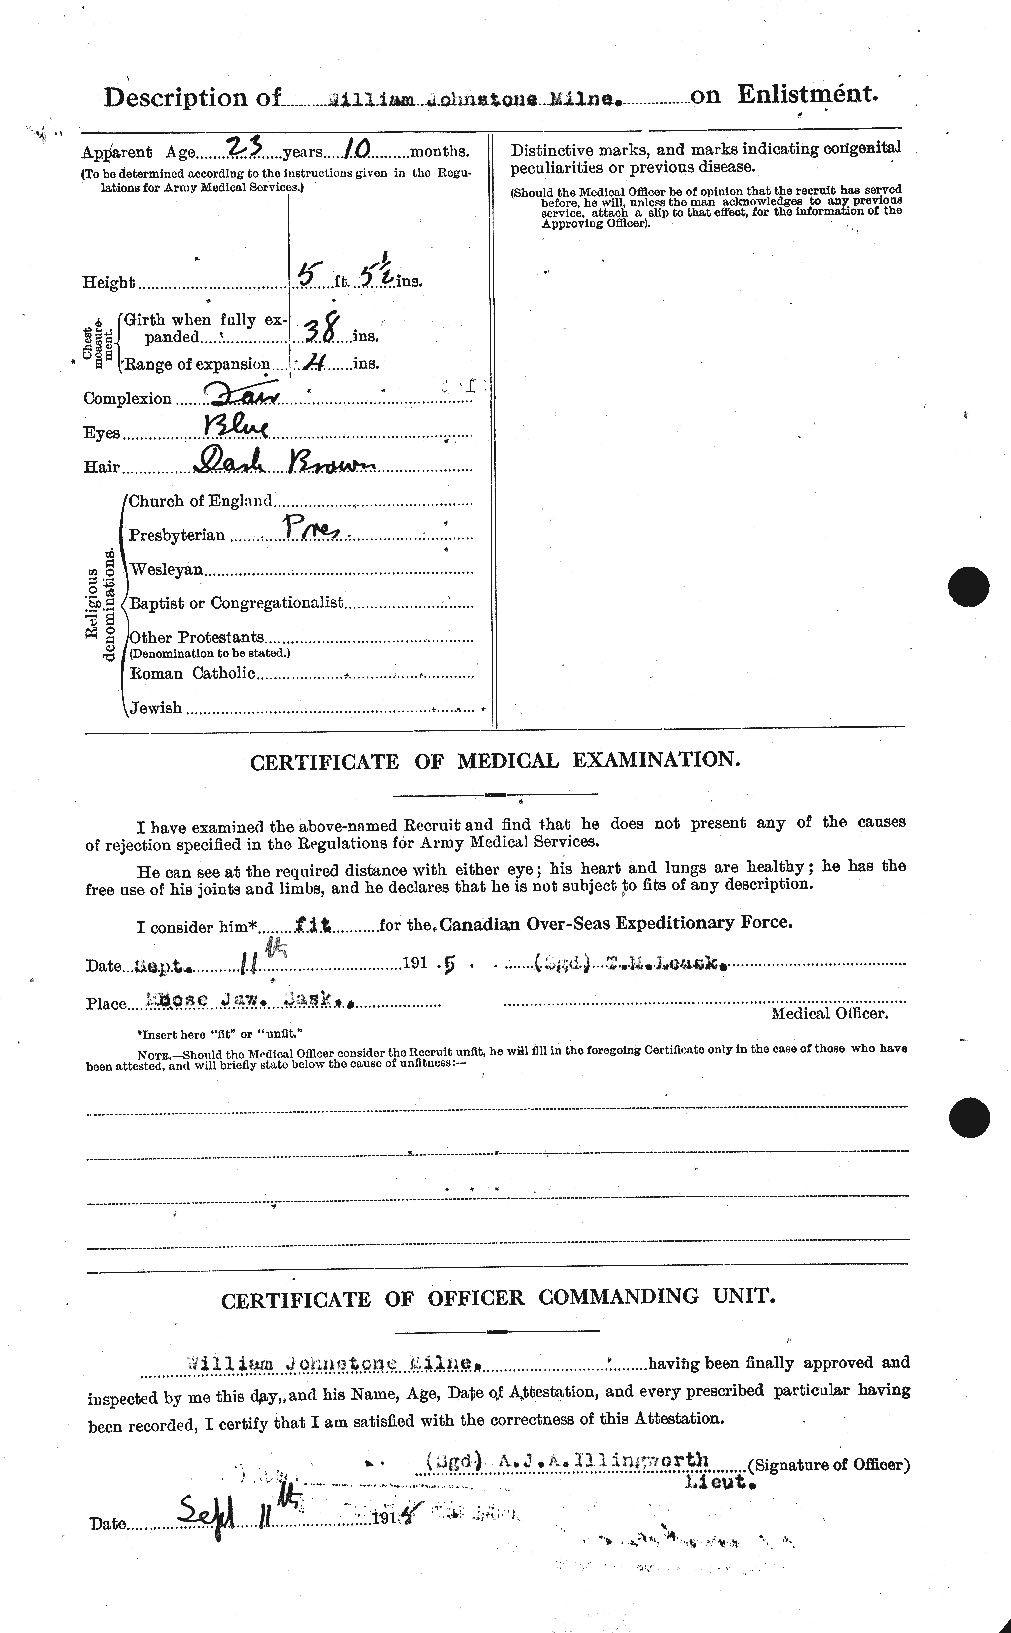 Personnel Records of the First World War - CEF 206286b